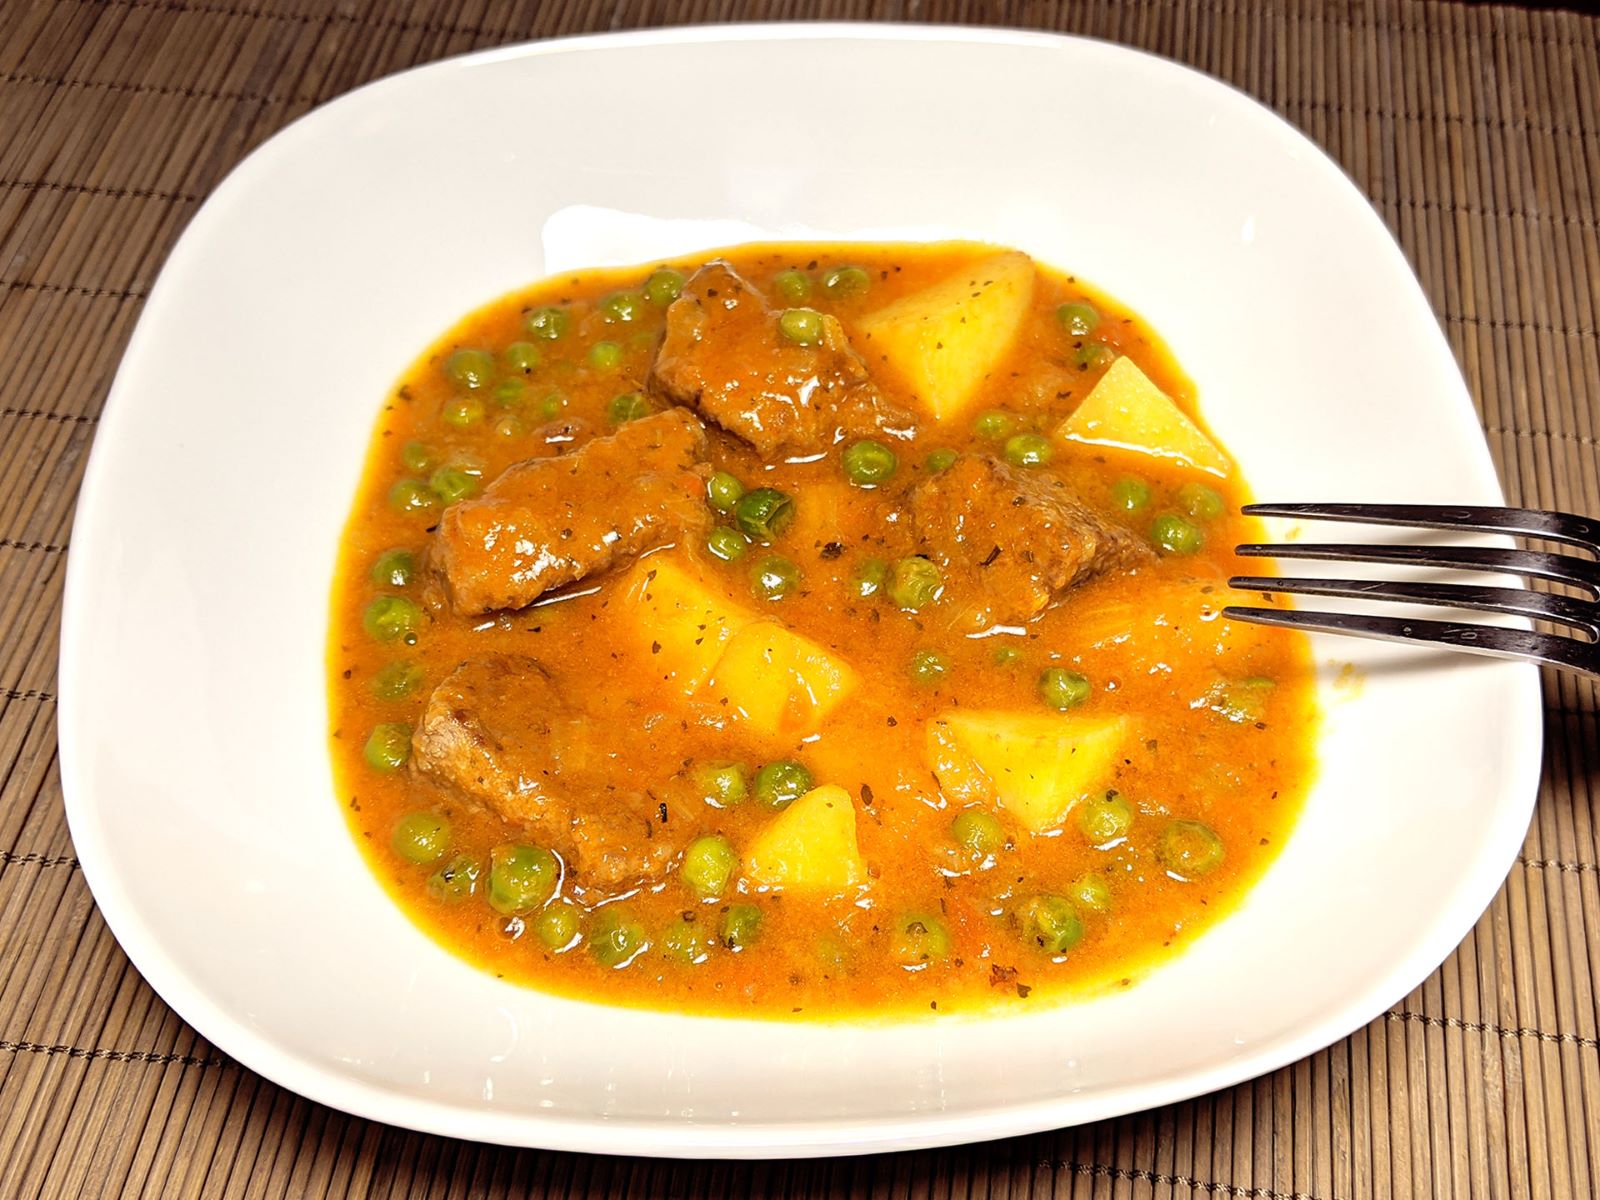 Delicious Veal Stew: A Refreshing Spring Dish